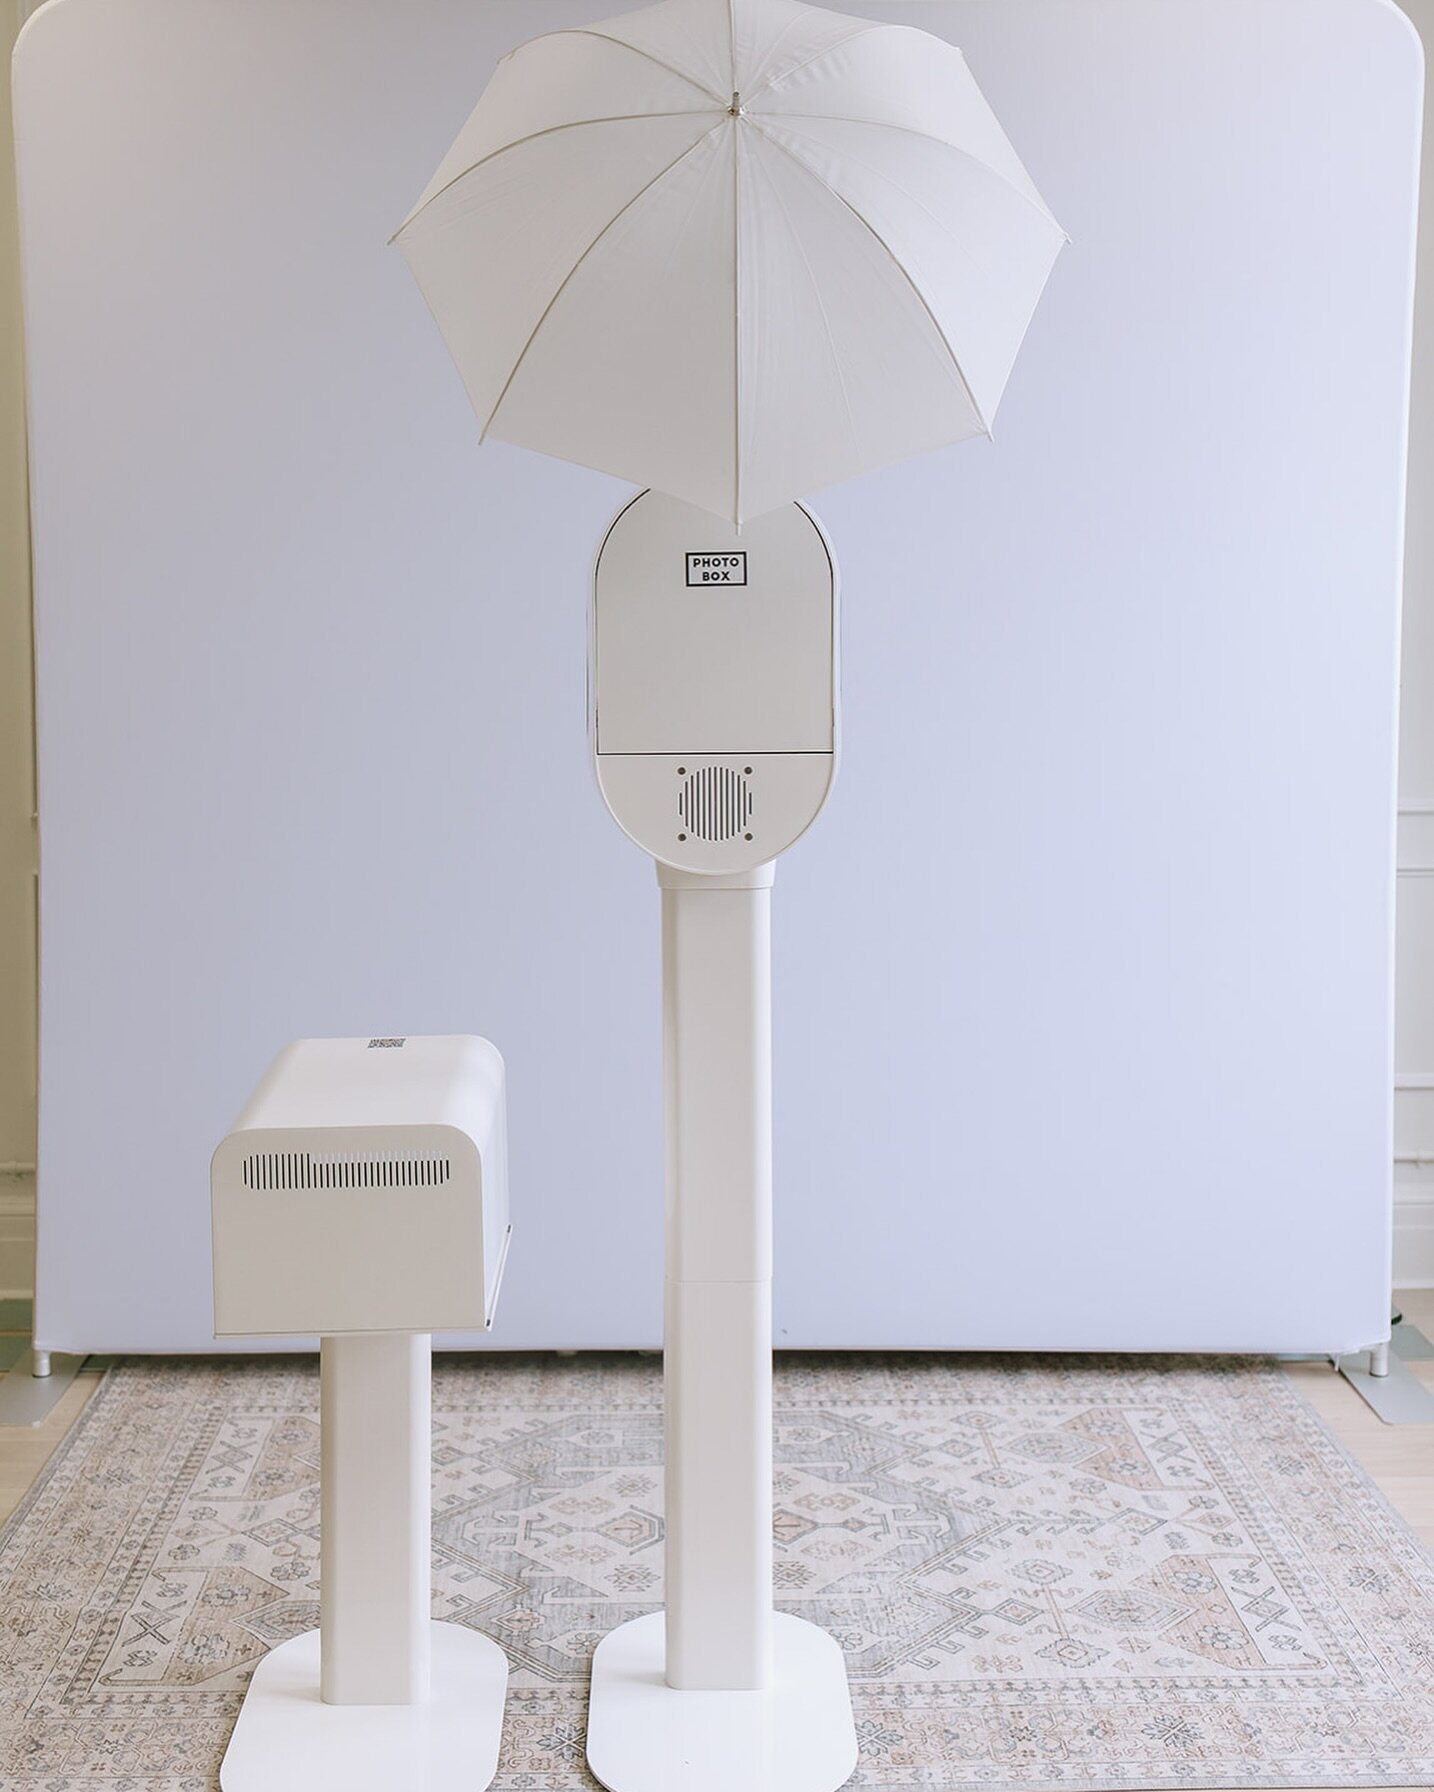 Our next booth in our lineup is the Studio booth. We&rsquo;d like to think of this one as our &ldquo;top of the line&rdquo; model. With a sleek, elegant form factor as well as its own matching printer stand, the Studio offers studio grade lighting, p